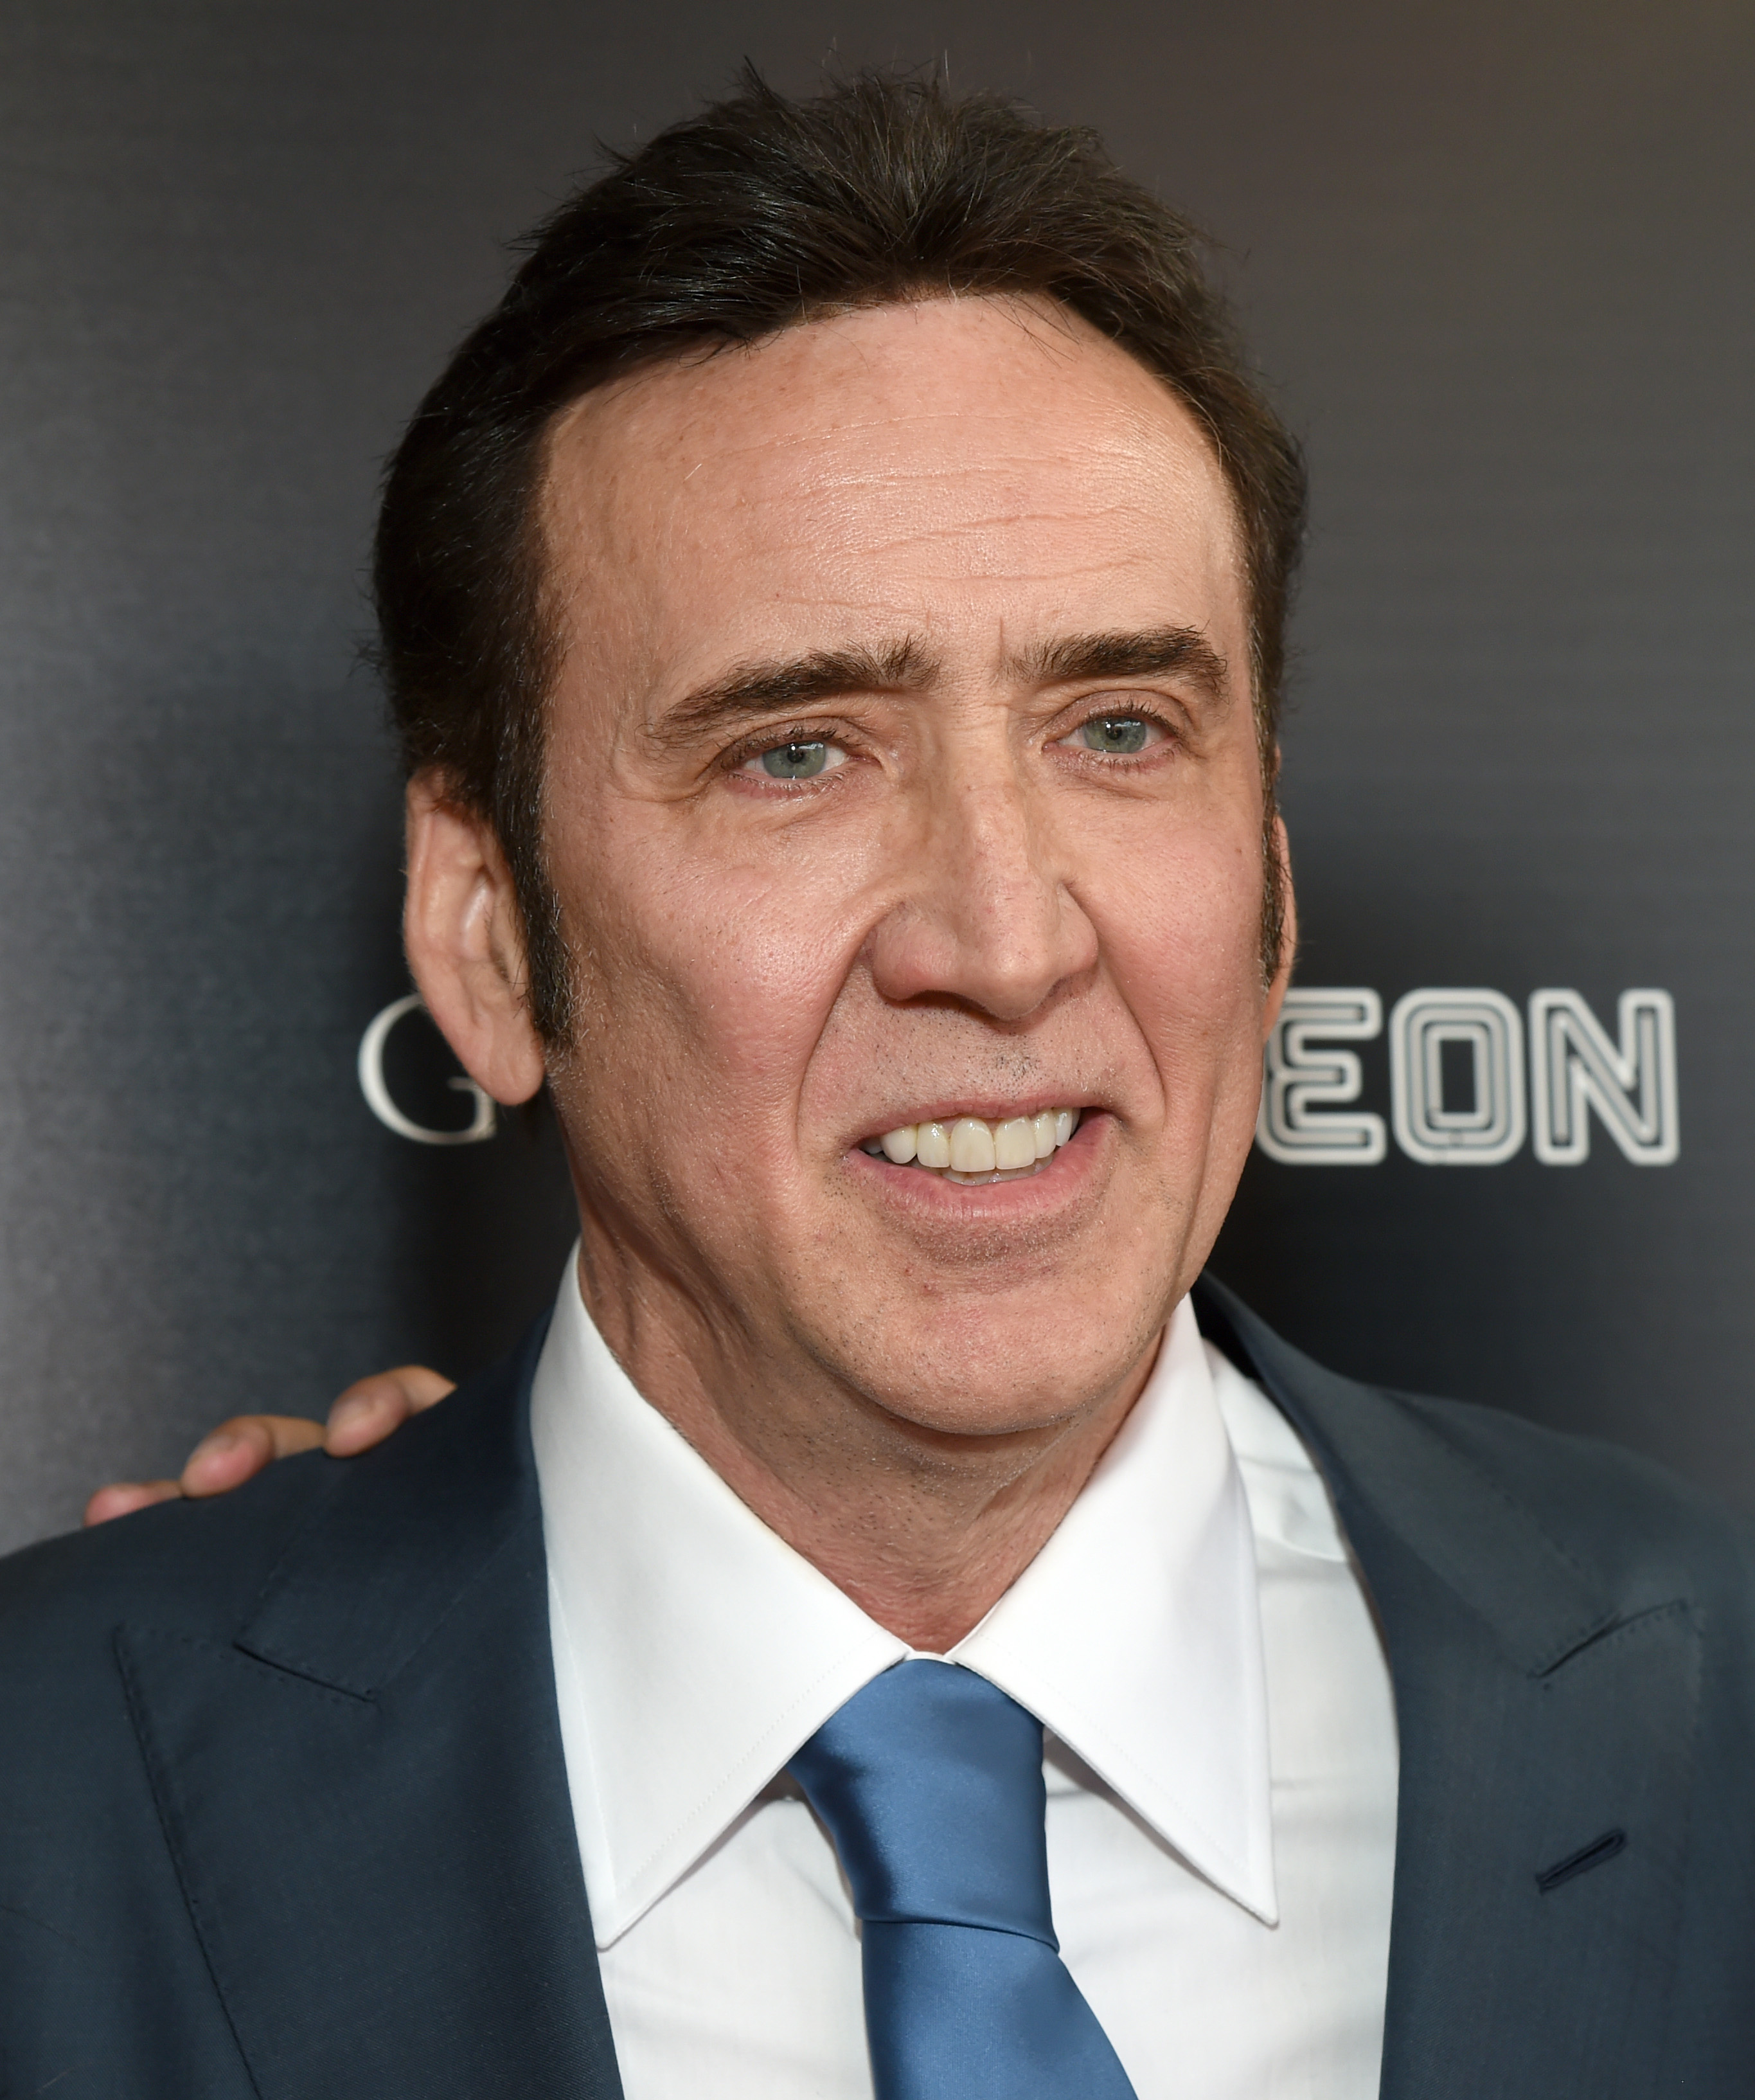 Nicolas Cage at the premiere of "PIG" on July 13, 2021, in Los Angeles, California. | Source: Getty Images